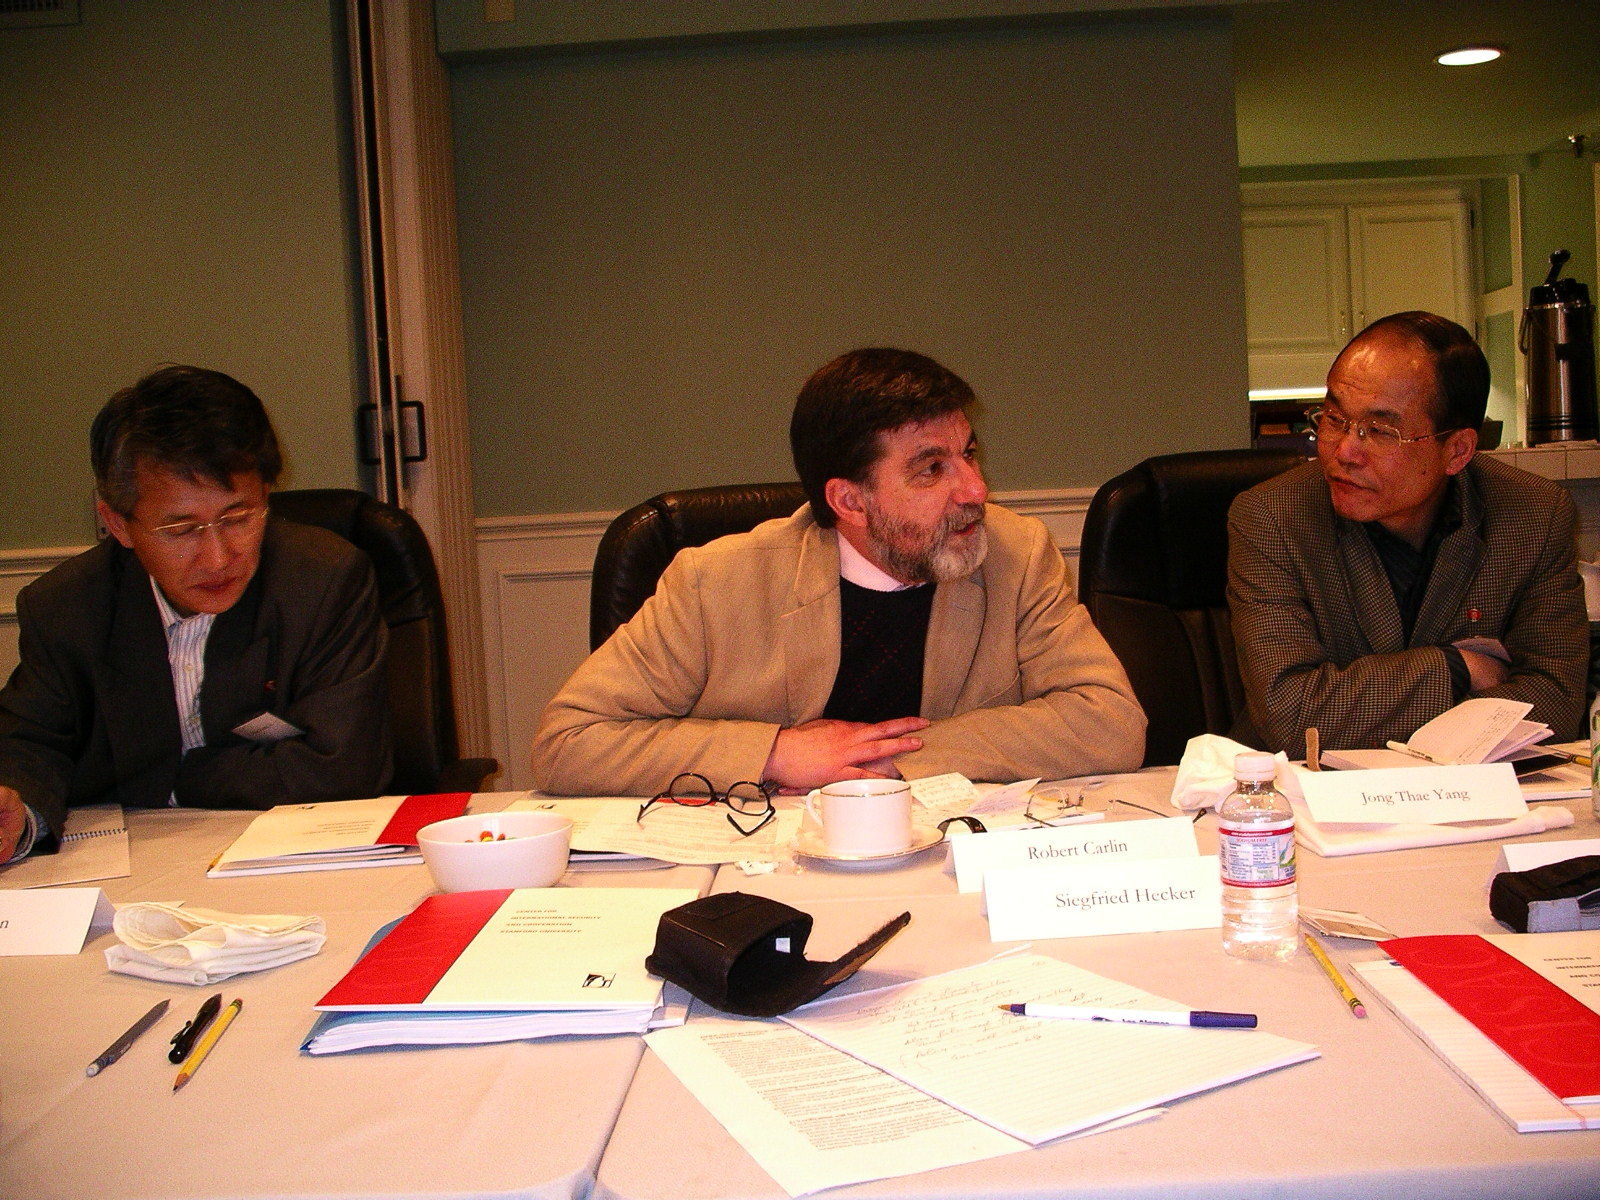 Three men at a conference table with the man in the center speaking